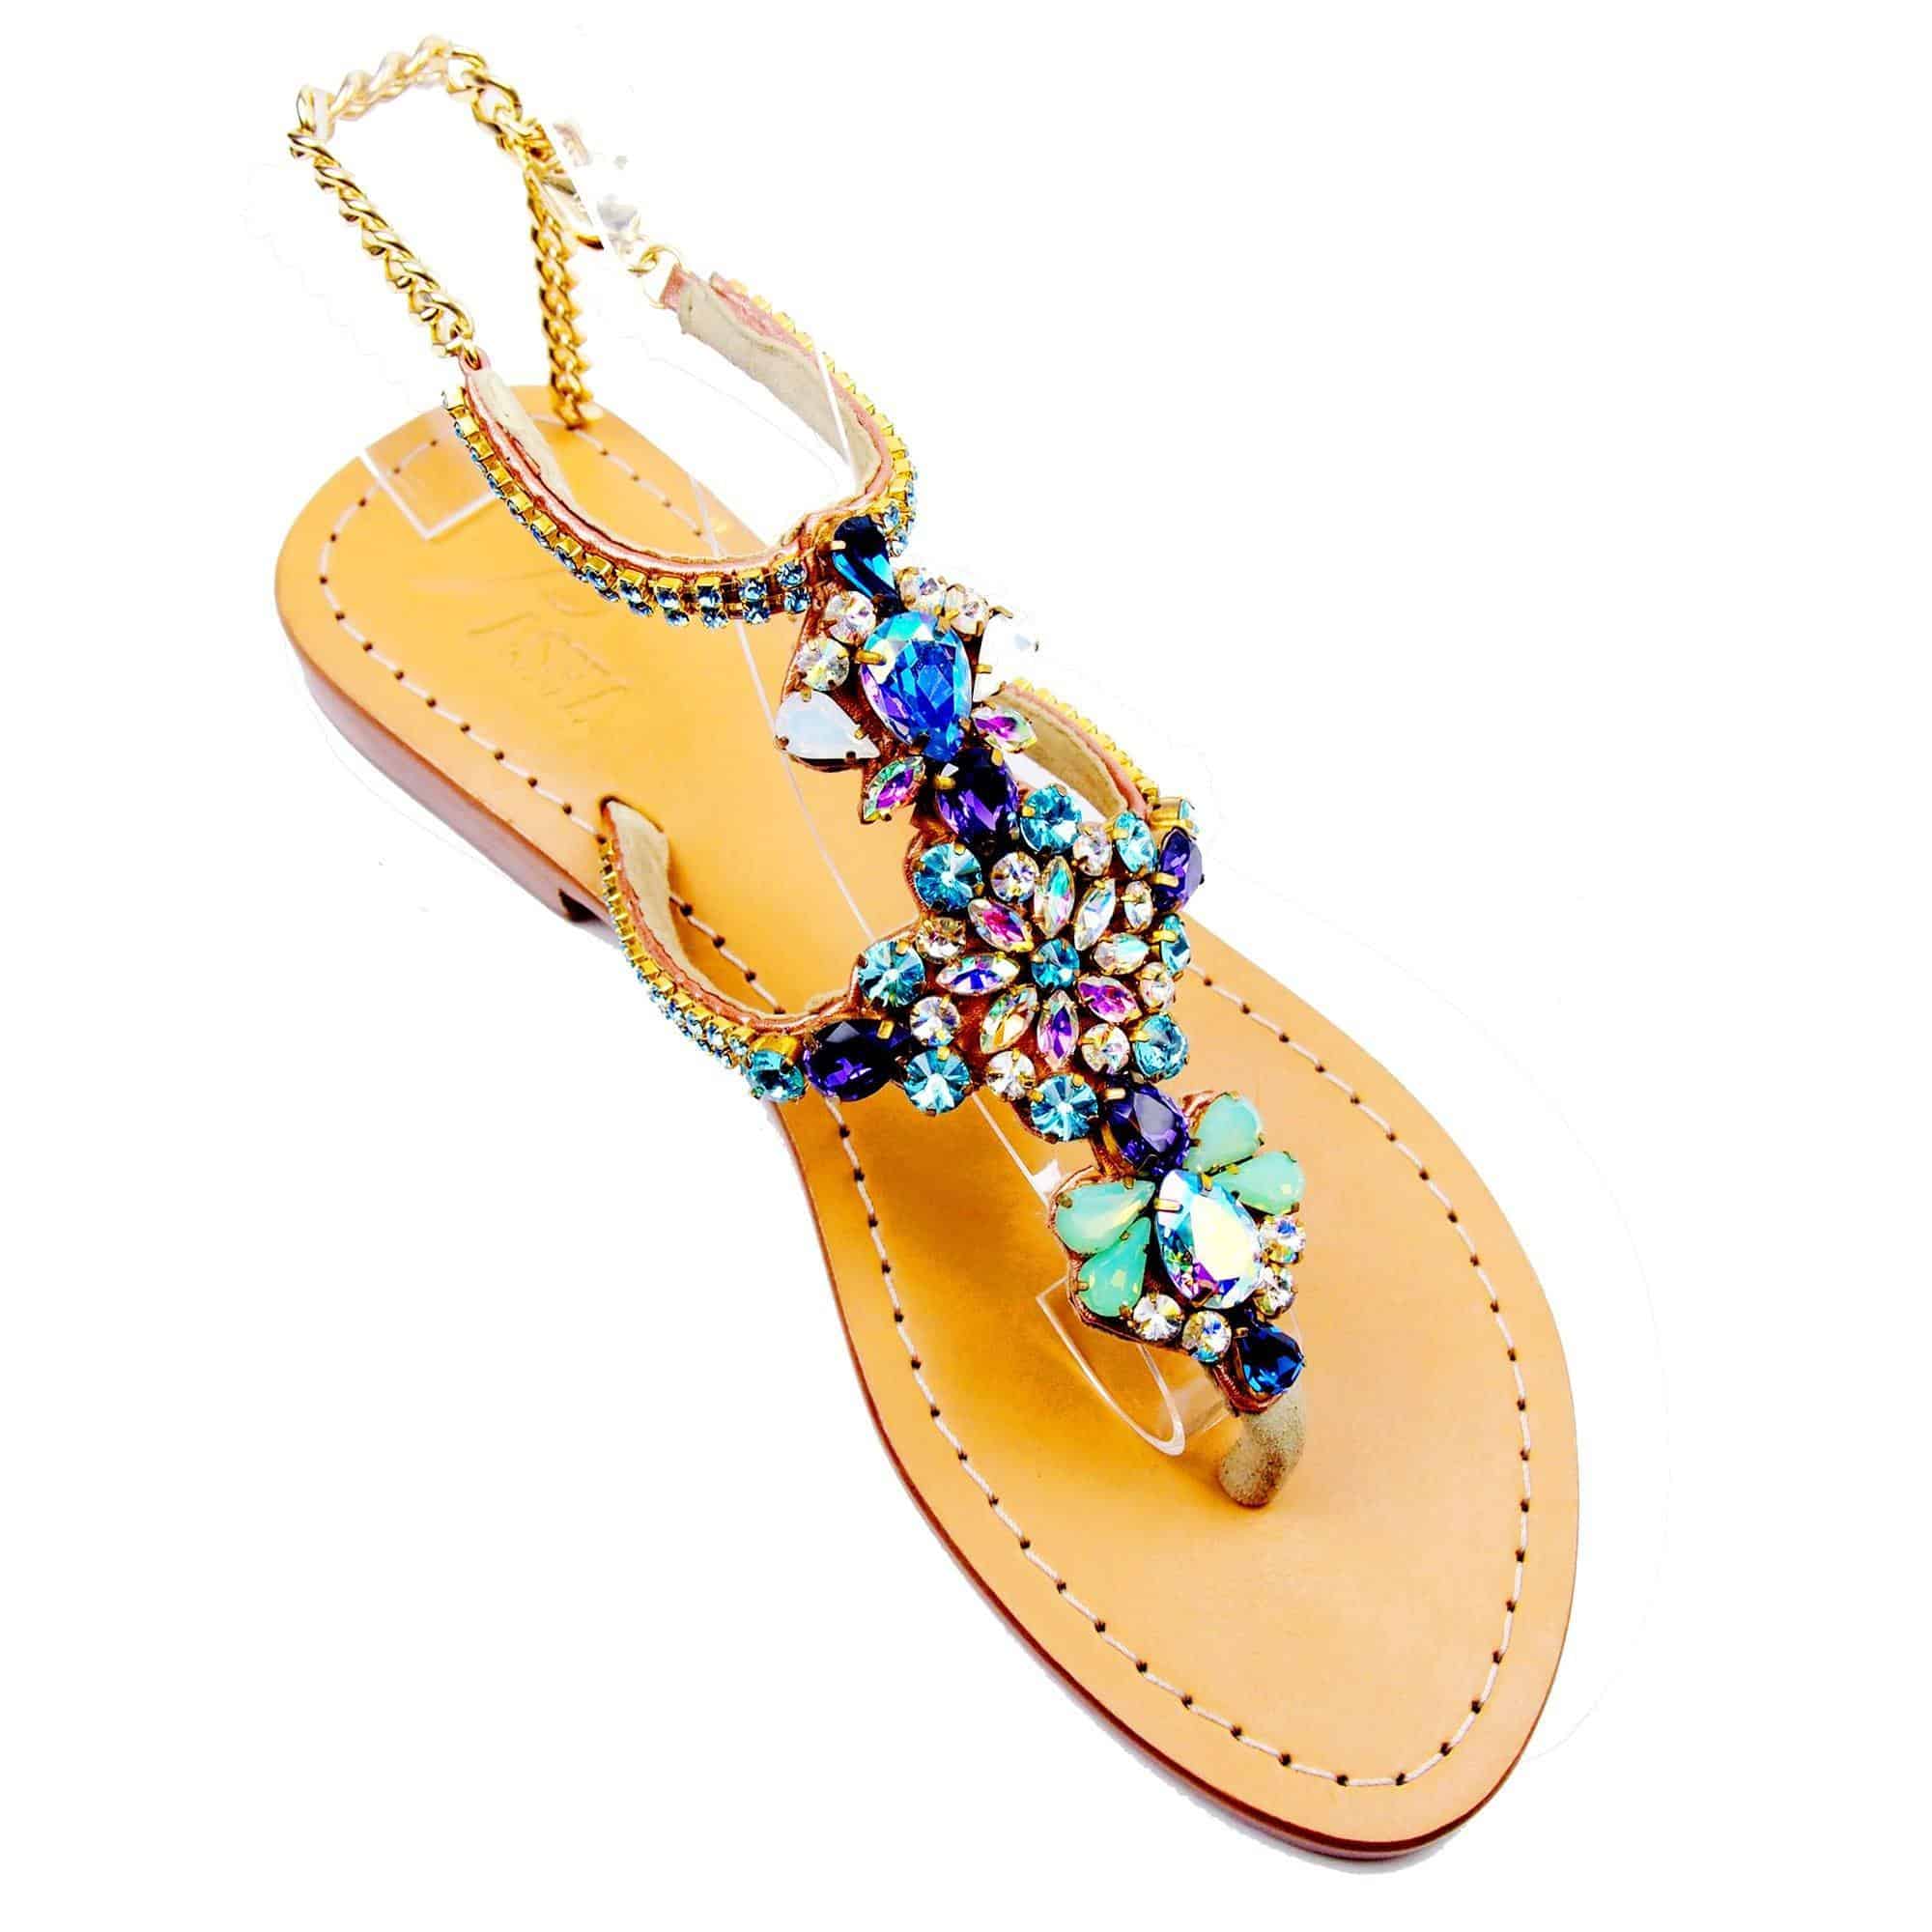 PASAS - Pasha Sandals - Jewelry for your feet - 